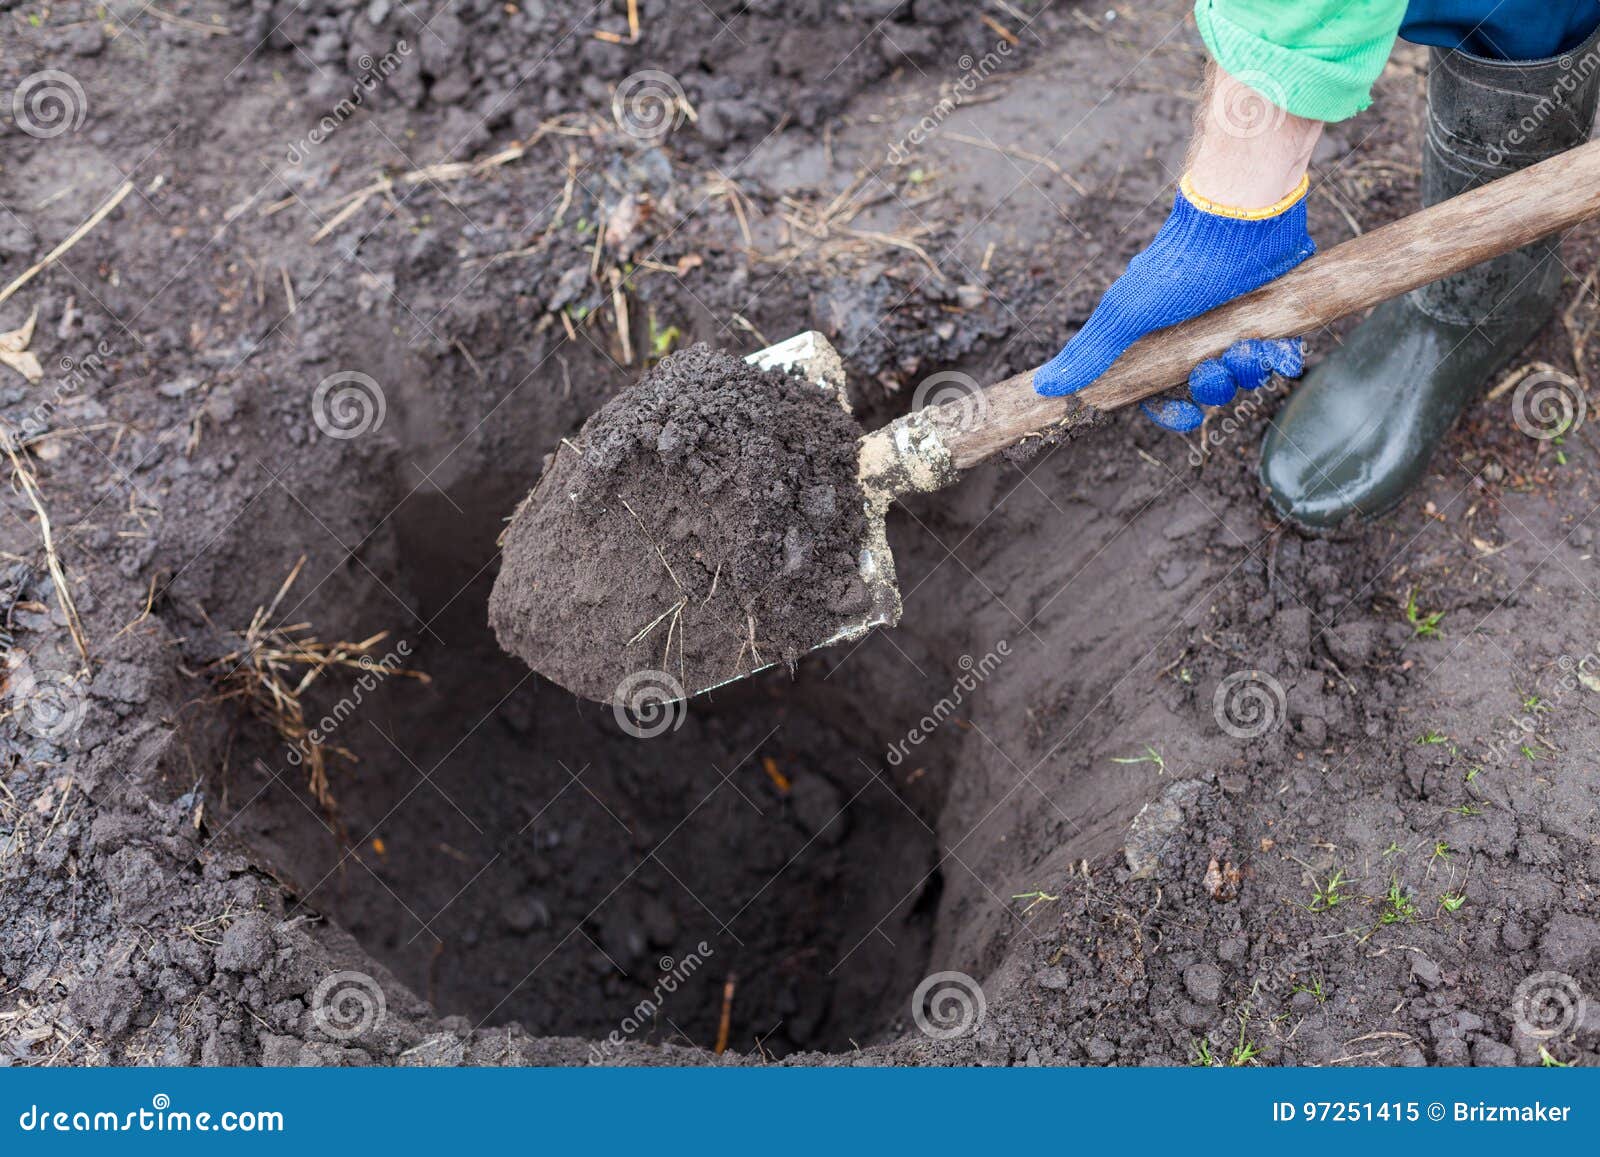 digging the hole for planting bush in garden